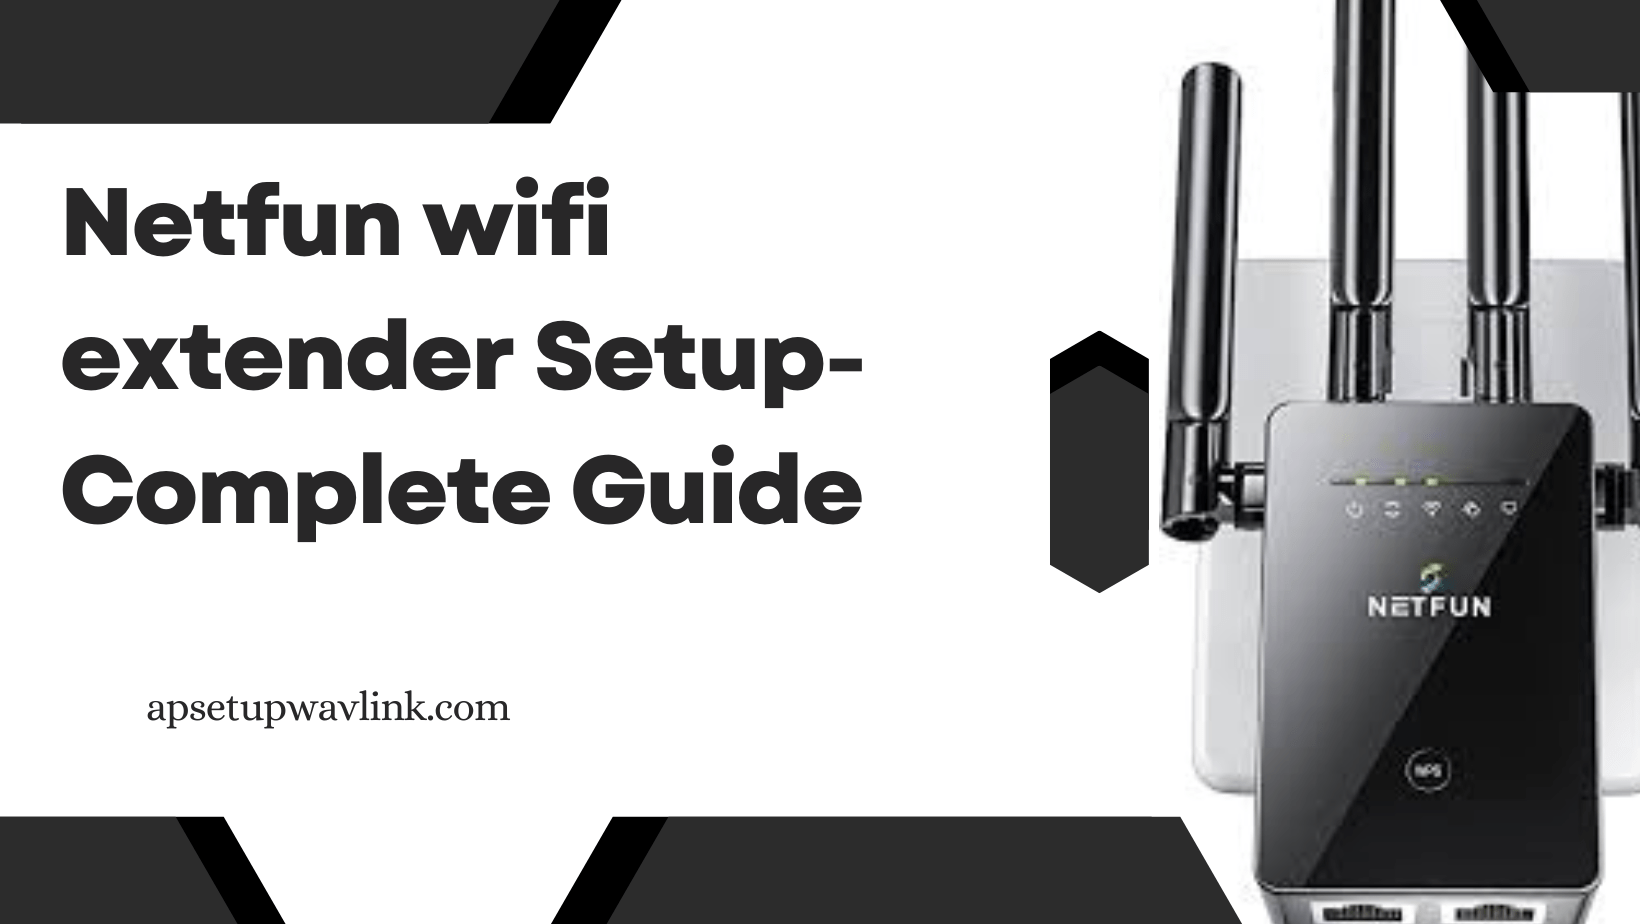 You are currently viewing Netfun wifi extender Setup- Complete Guide 